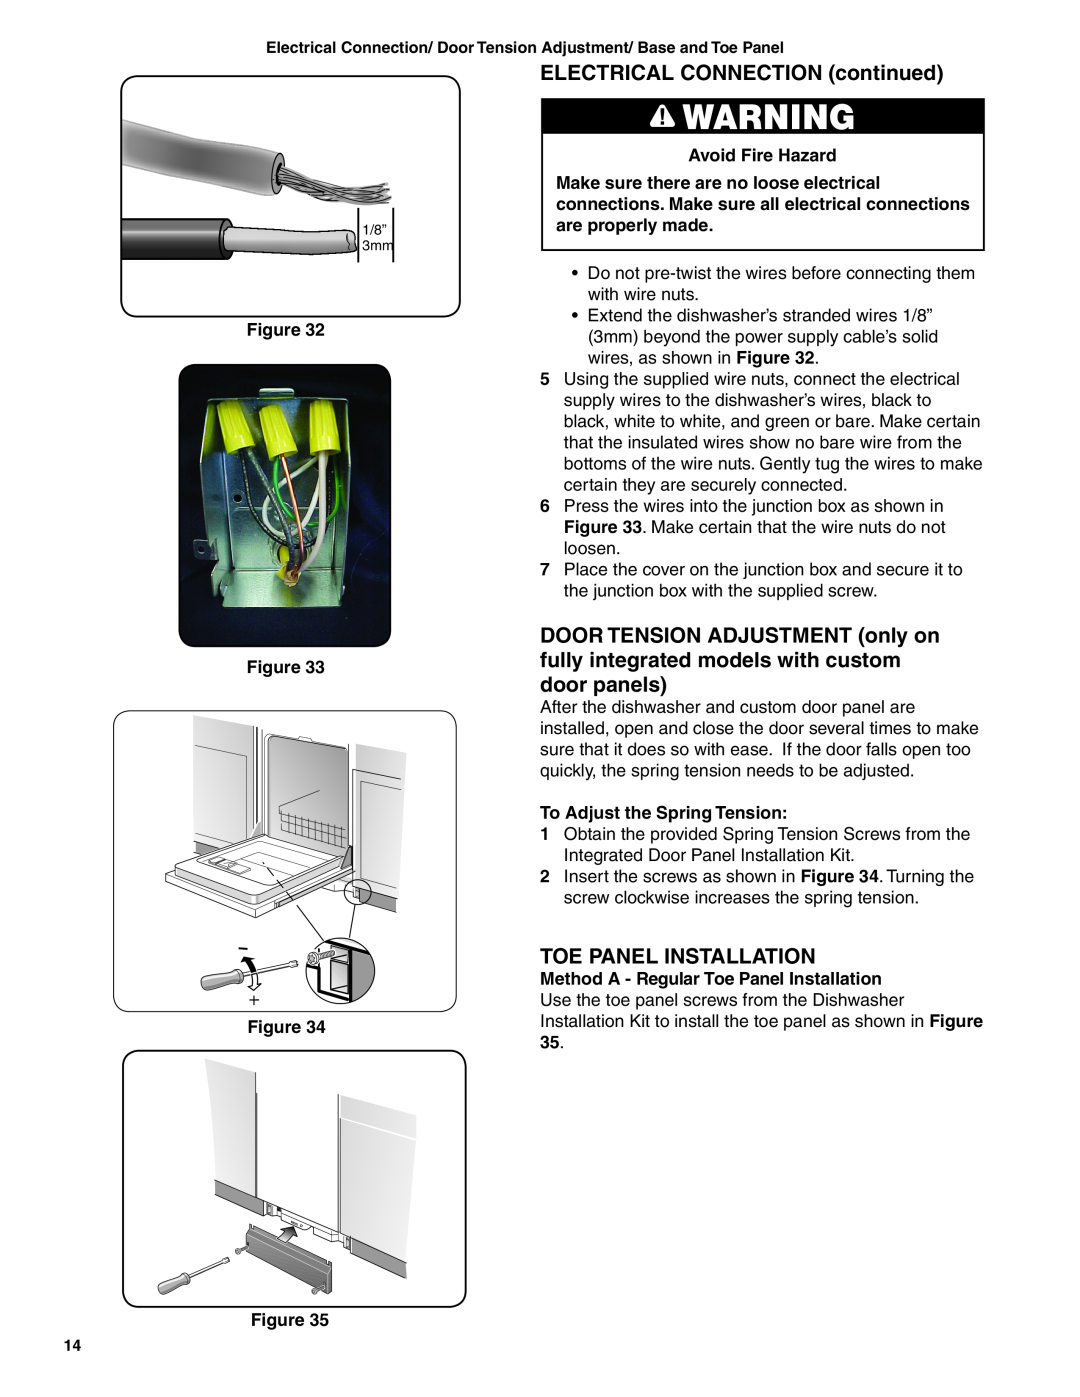 Bosch Appliances BSH Dishwasher ELECTRICAL CONNECTION continued, Toe Panel Installation, Avoid Fire Hazard 